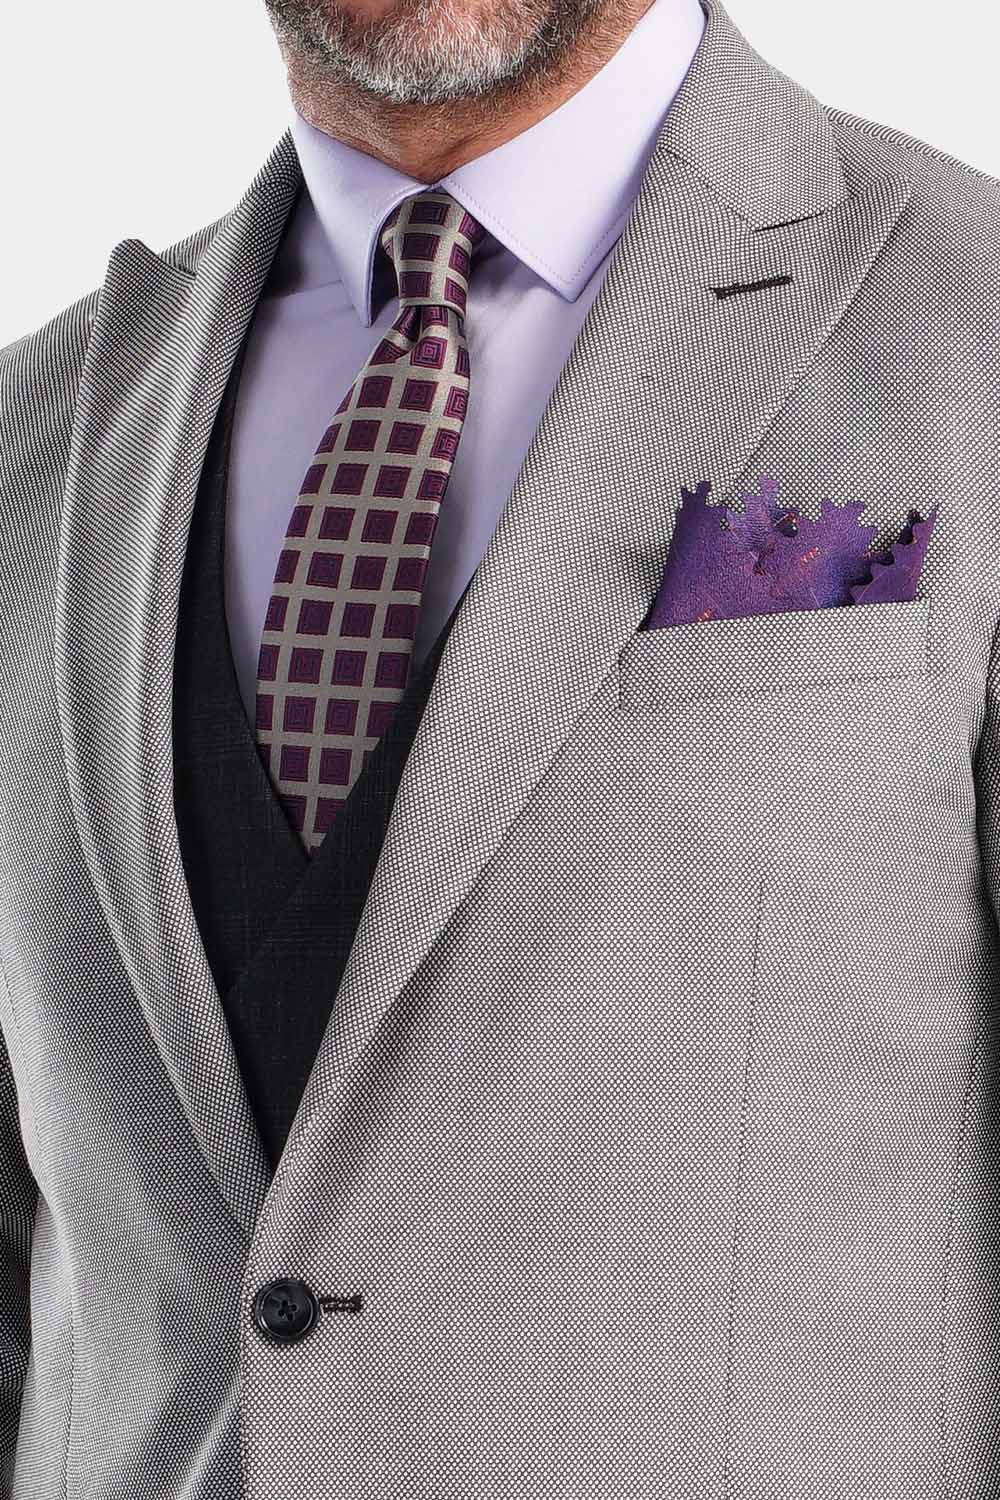 Close Up Of A Dark Gray Striped Jacked With White Shirt And Patterned Black  Purple Tie Stock Photo, Picture and Royalty Free Image. Image 15983959.